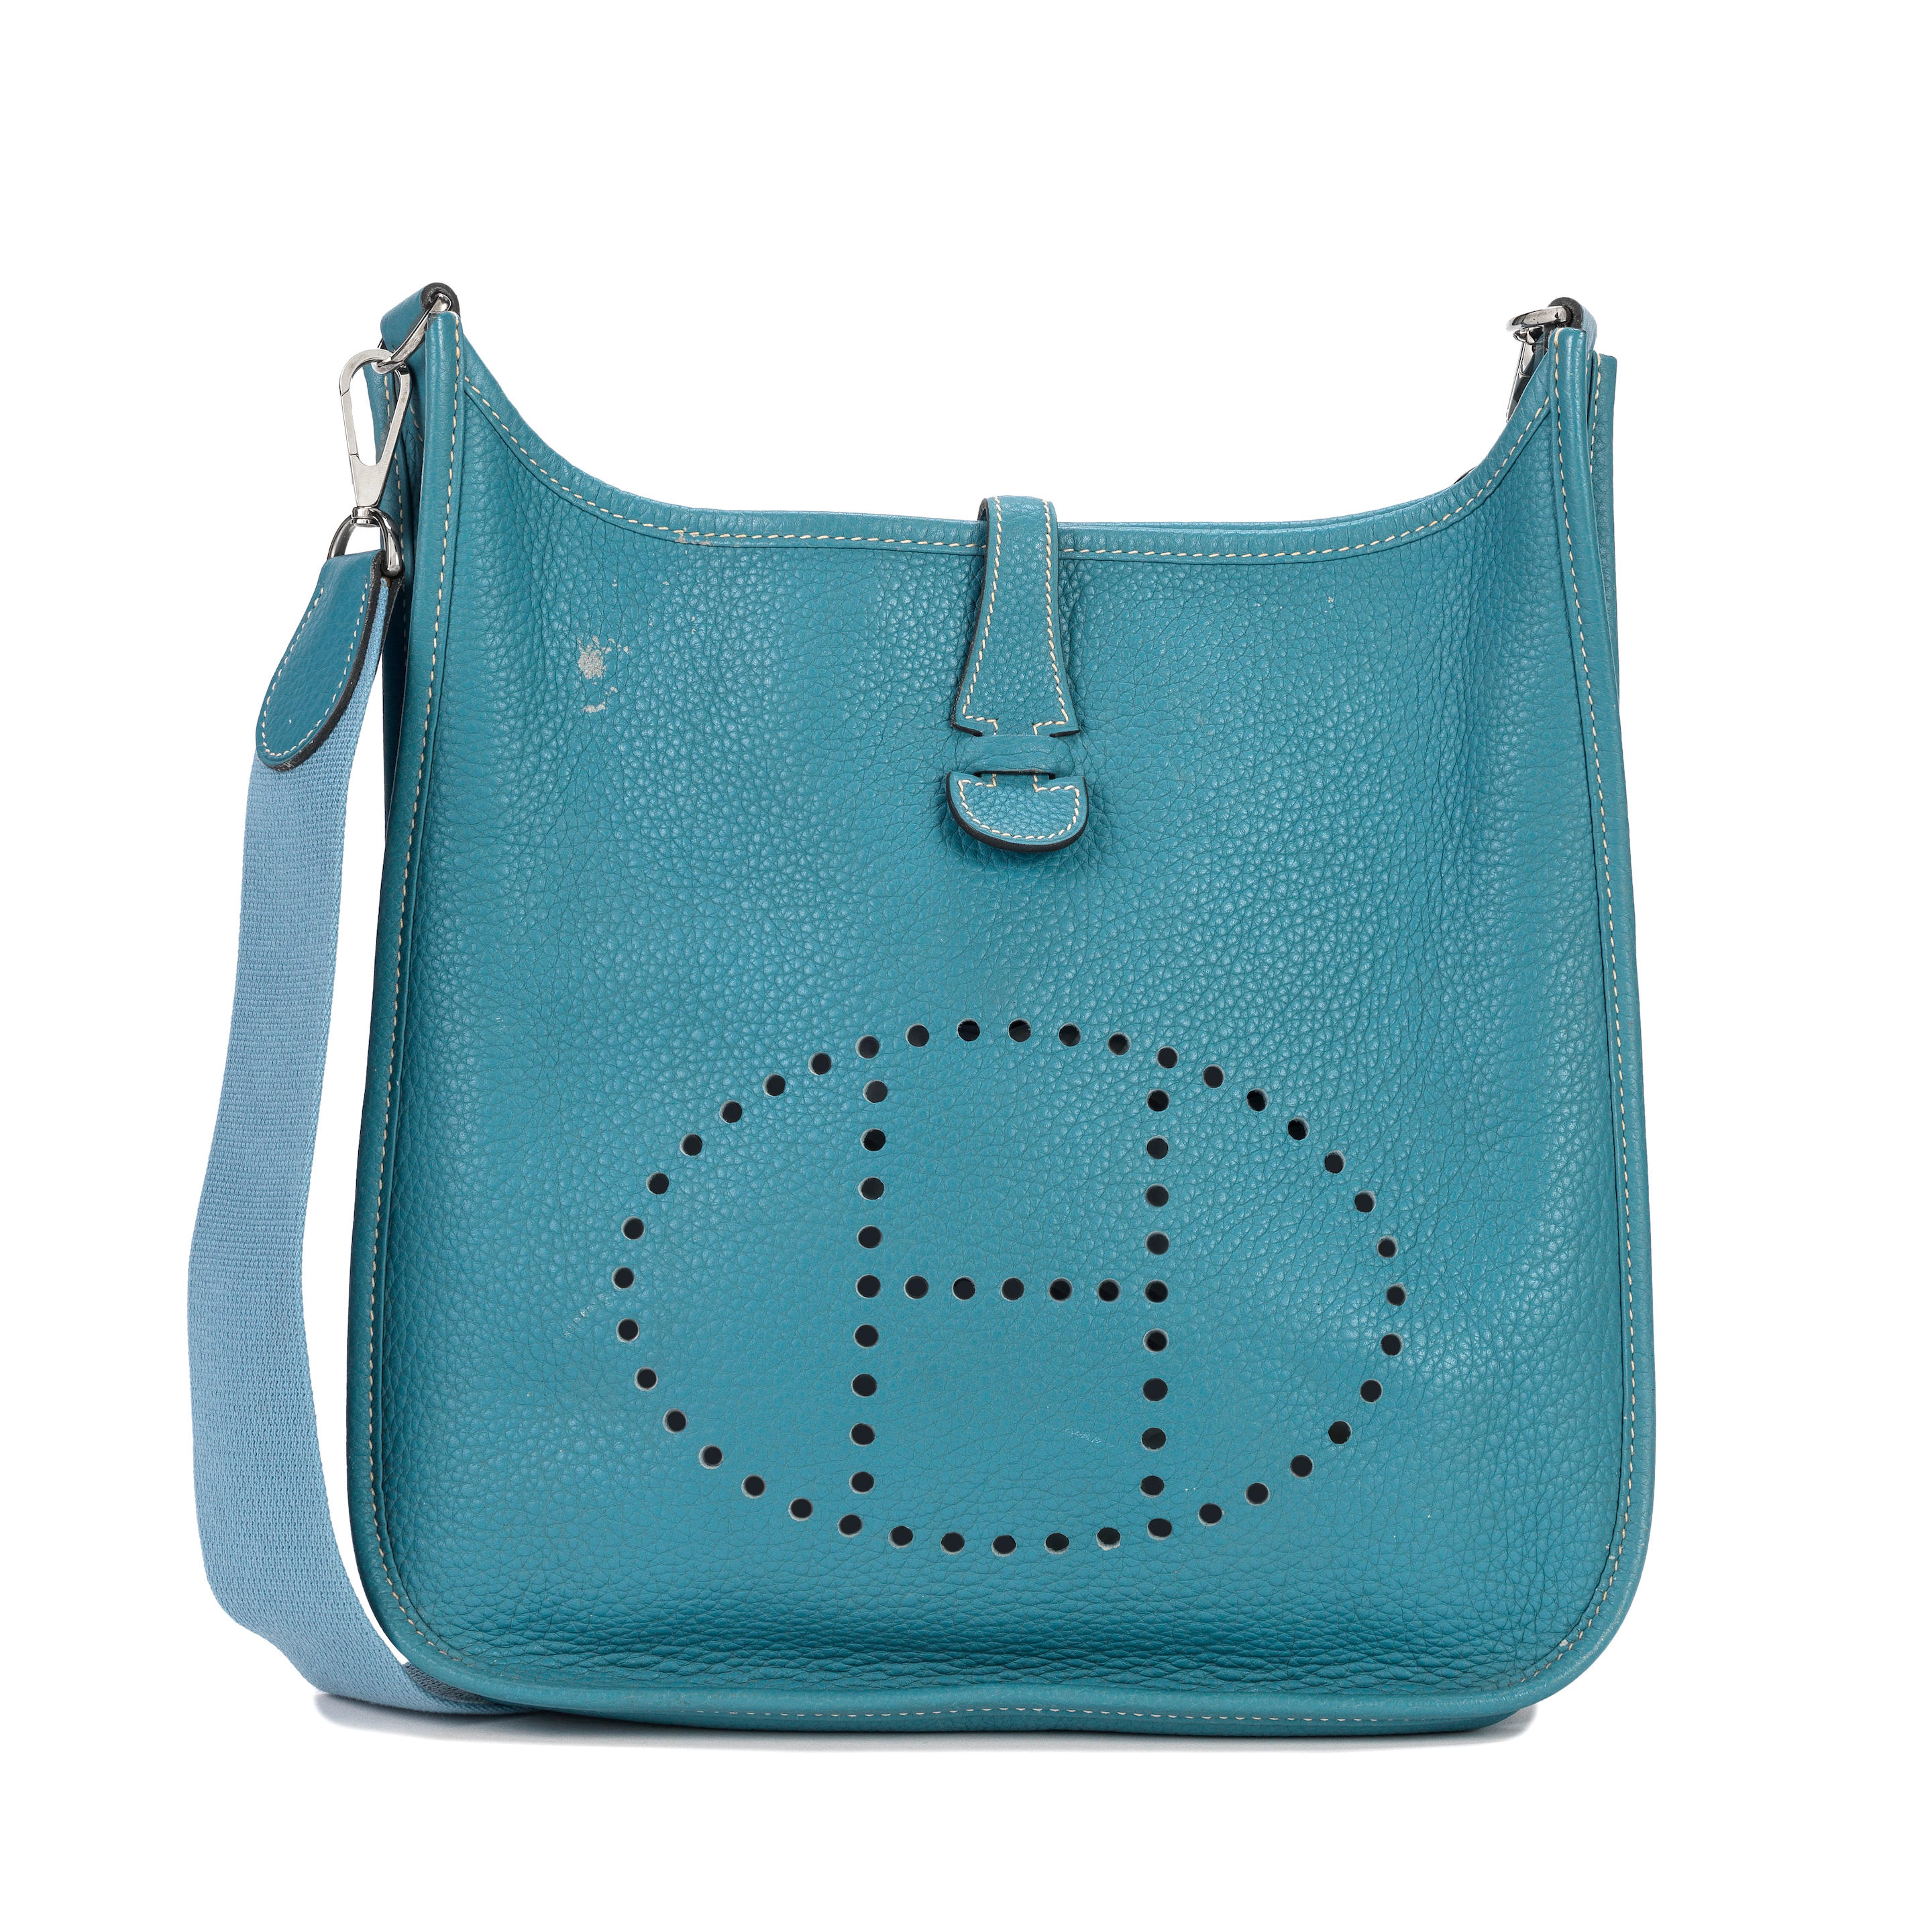 Auction - Designer Handbags and Fashion at 16.03.2022 - LotSearch